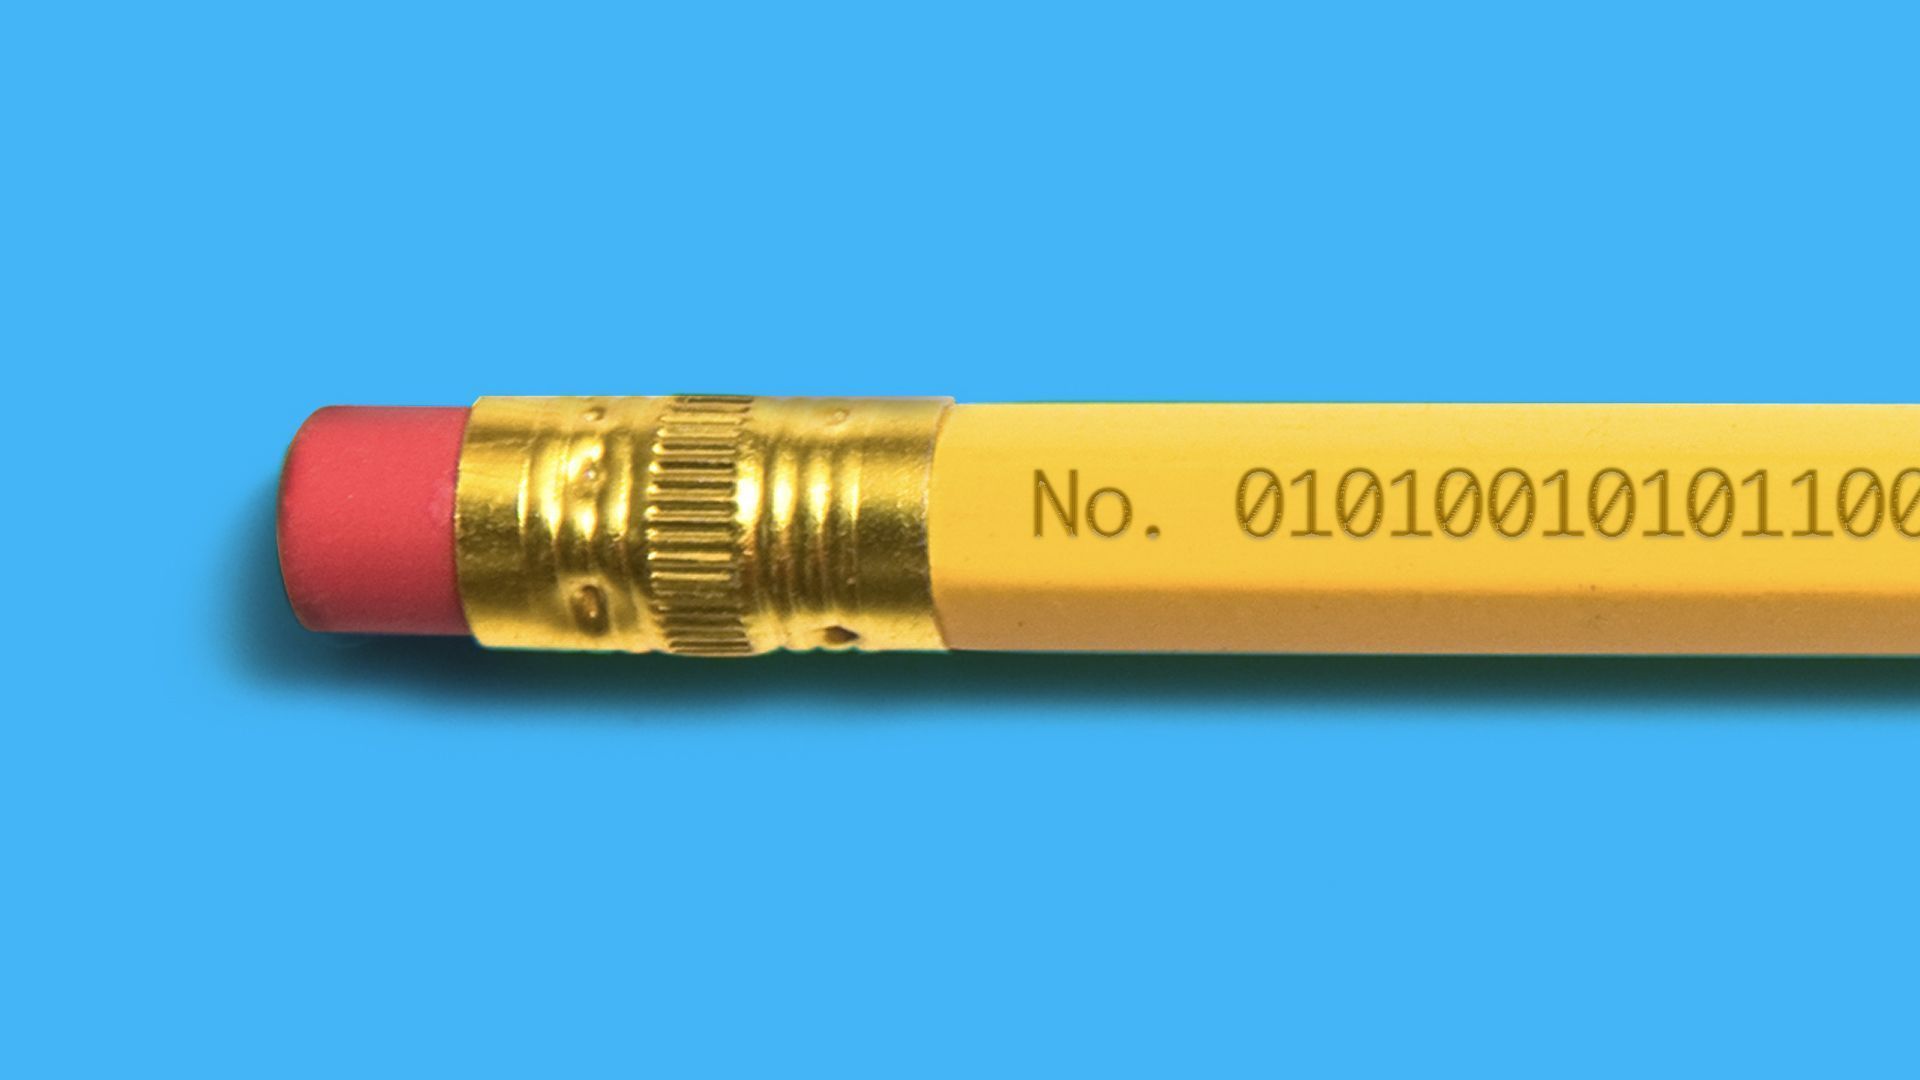 Illustration of a pencil with binary code on it